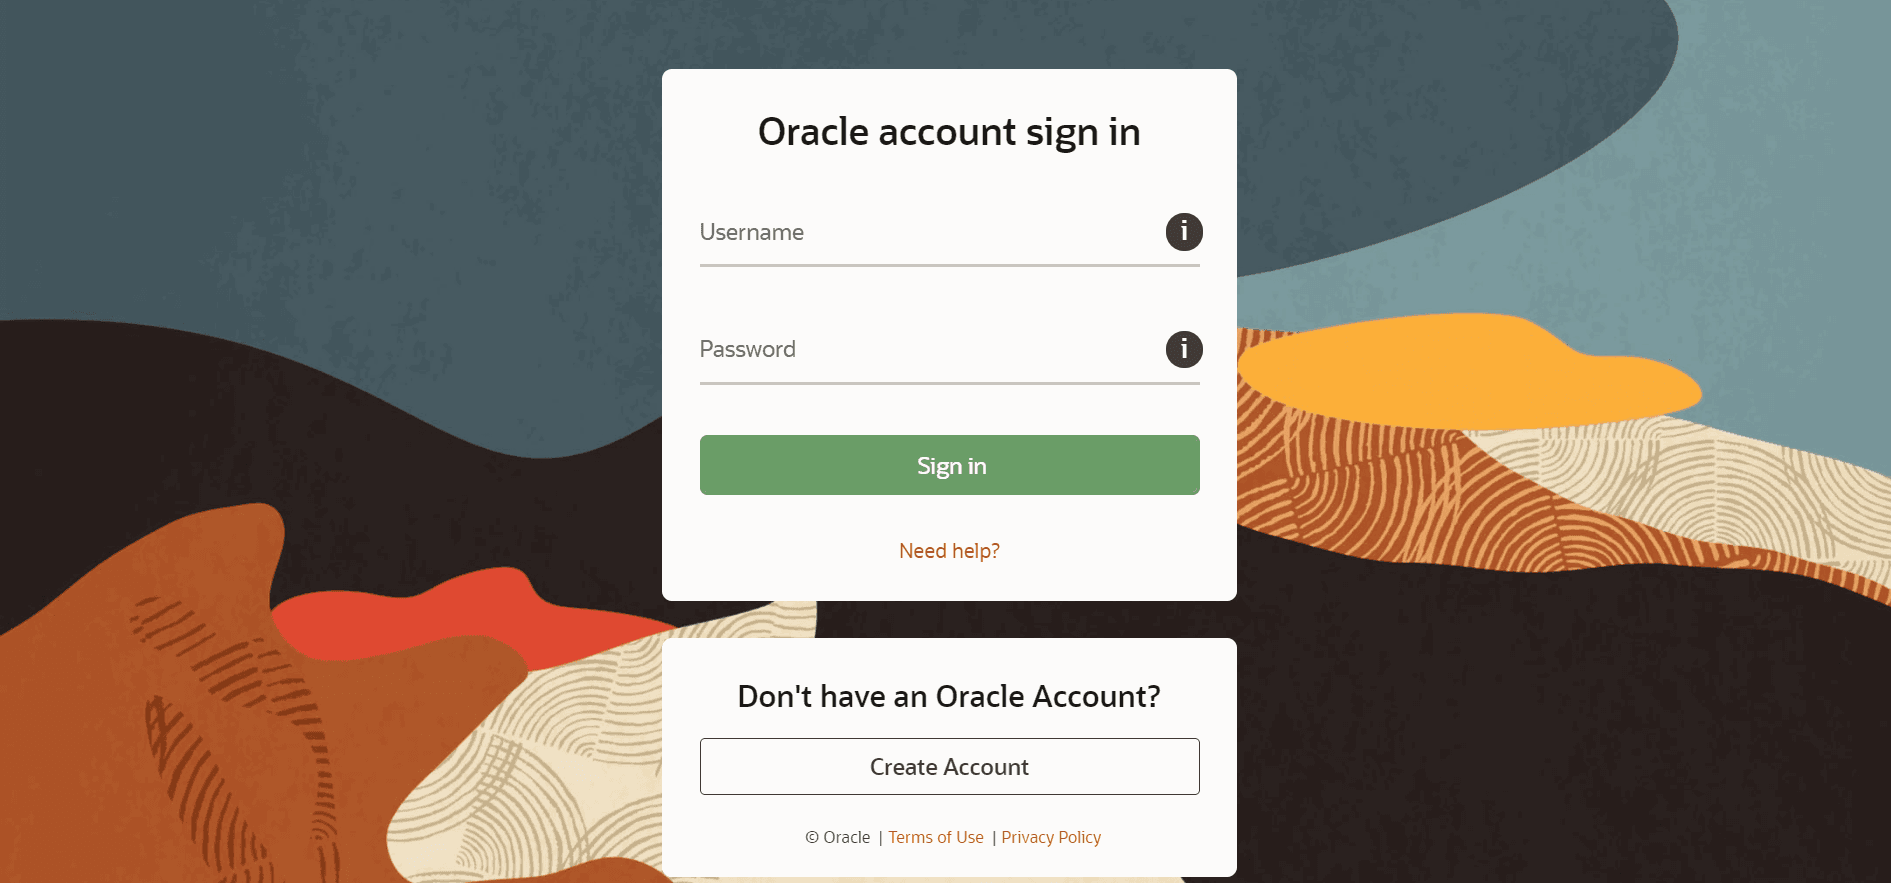 Oracle account sign in